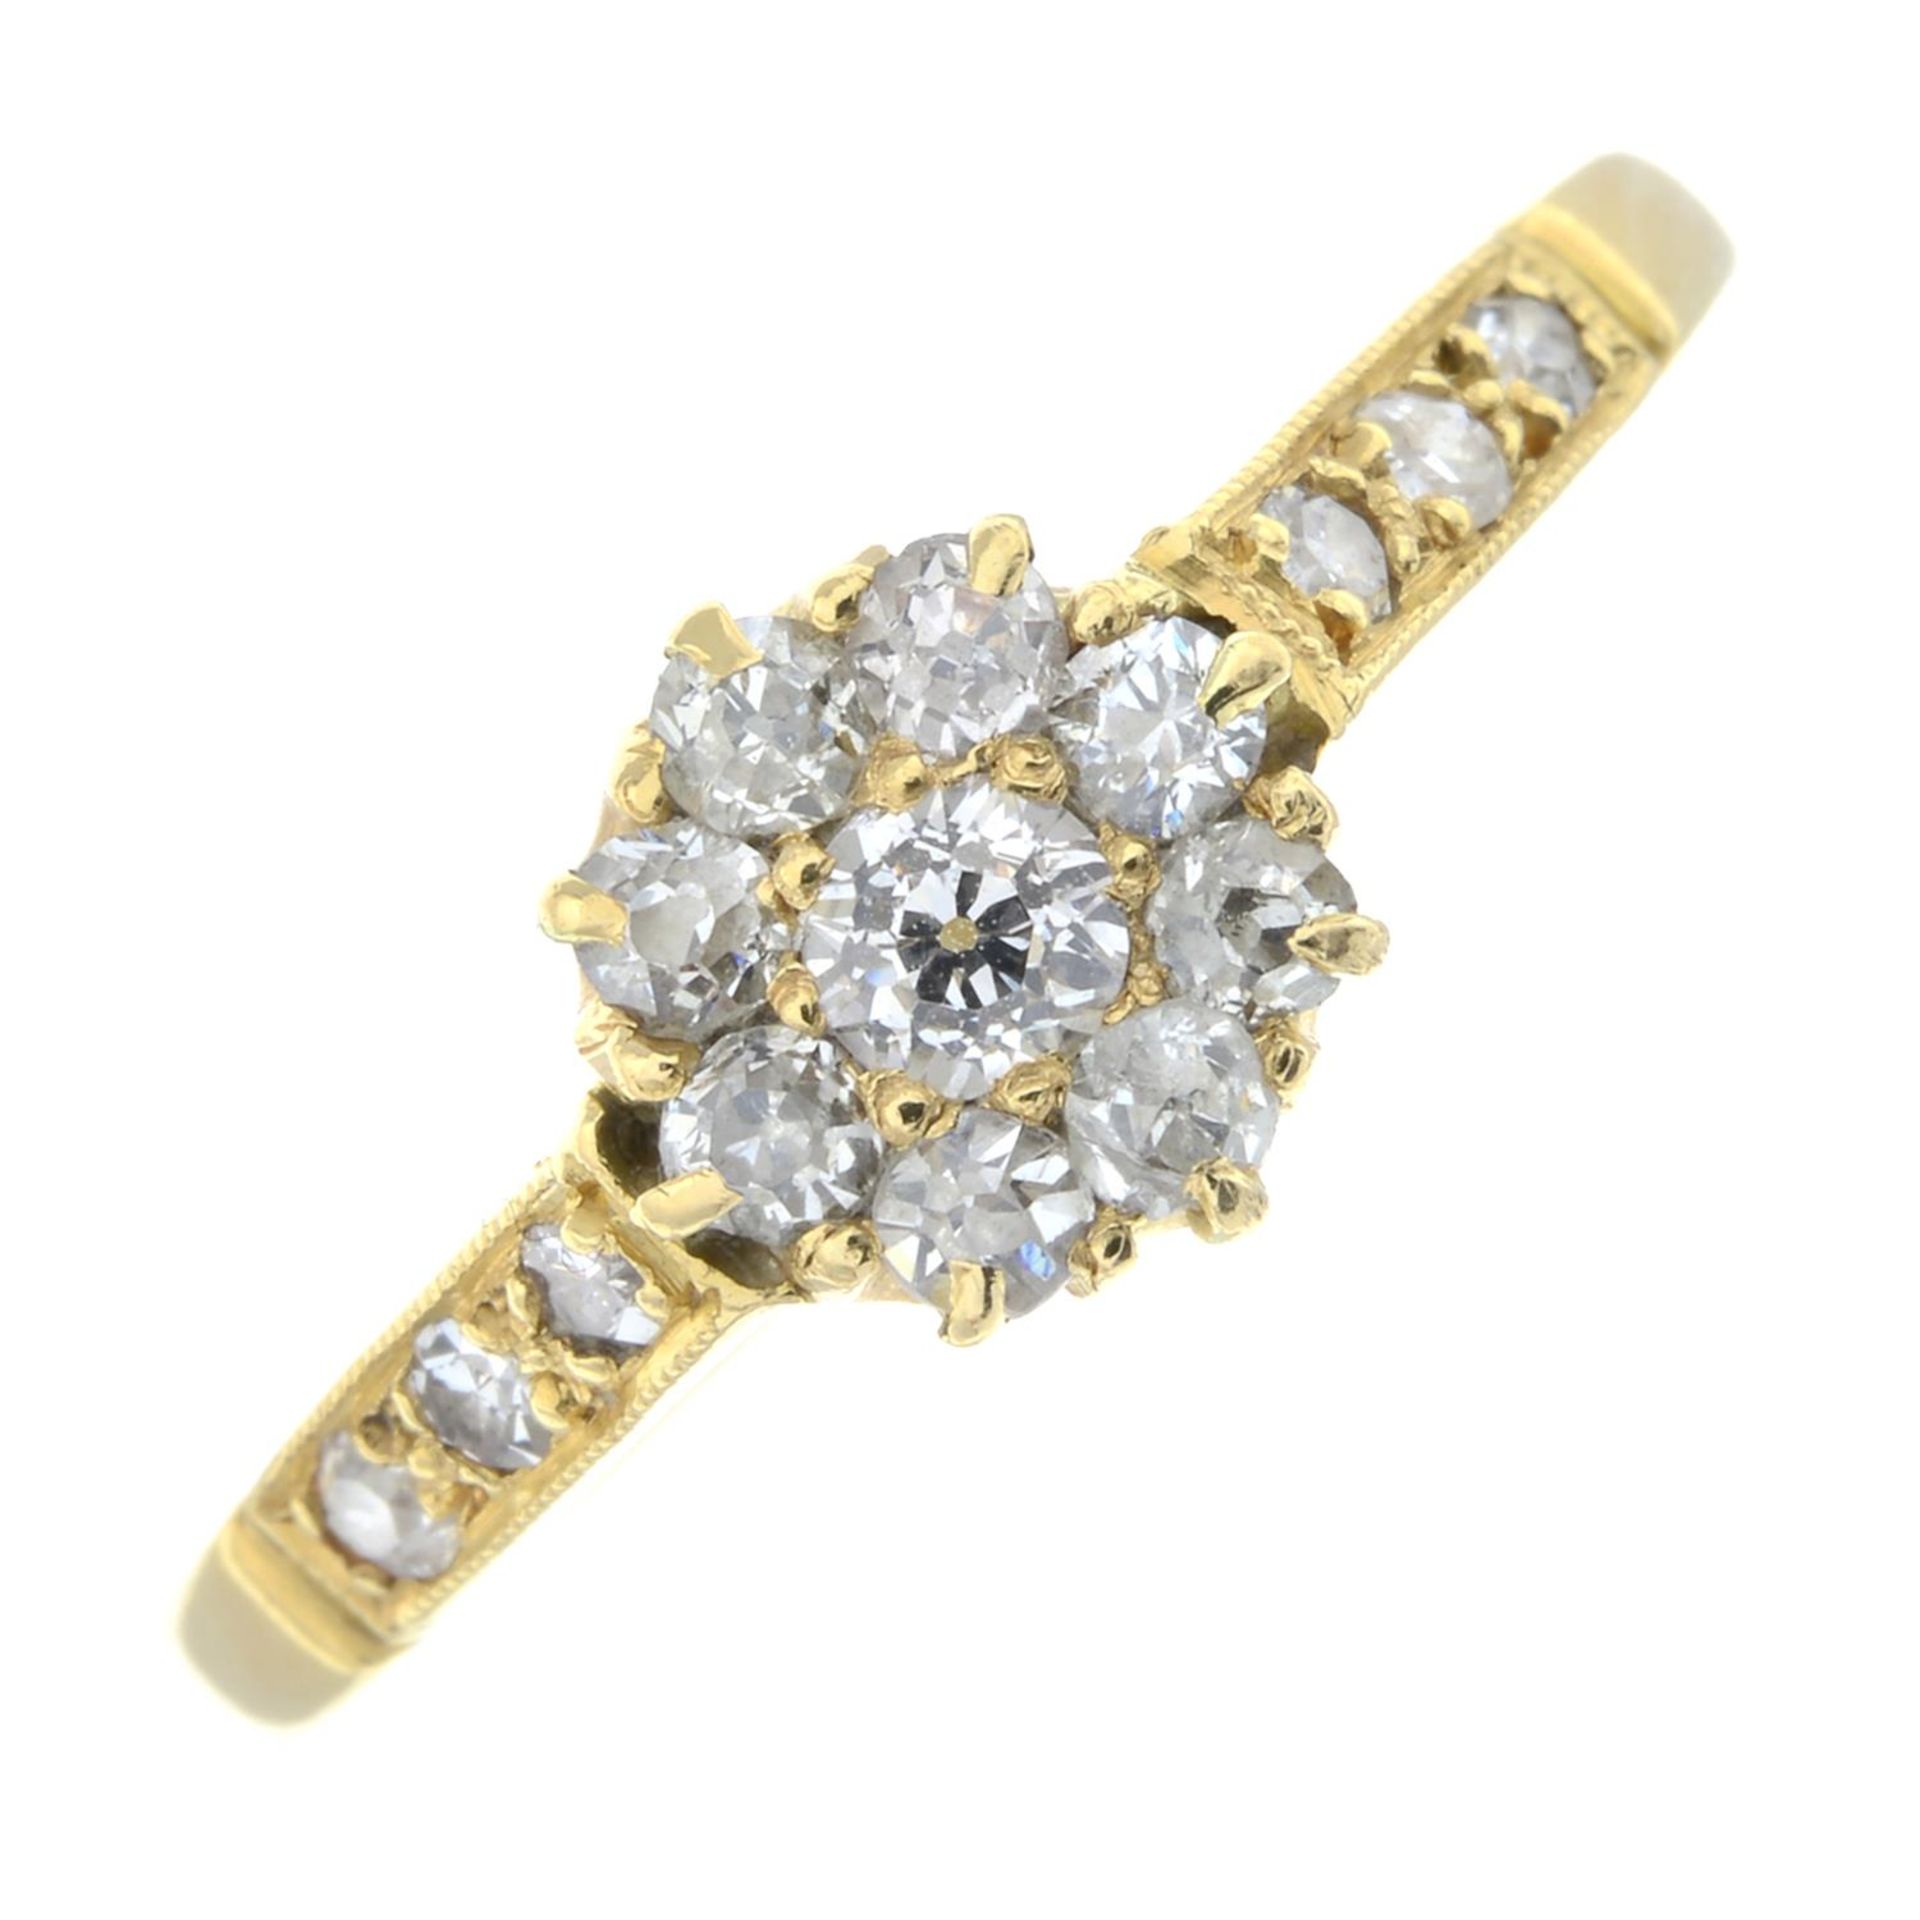 An old-cut diamond cluster ring.